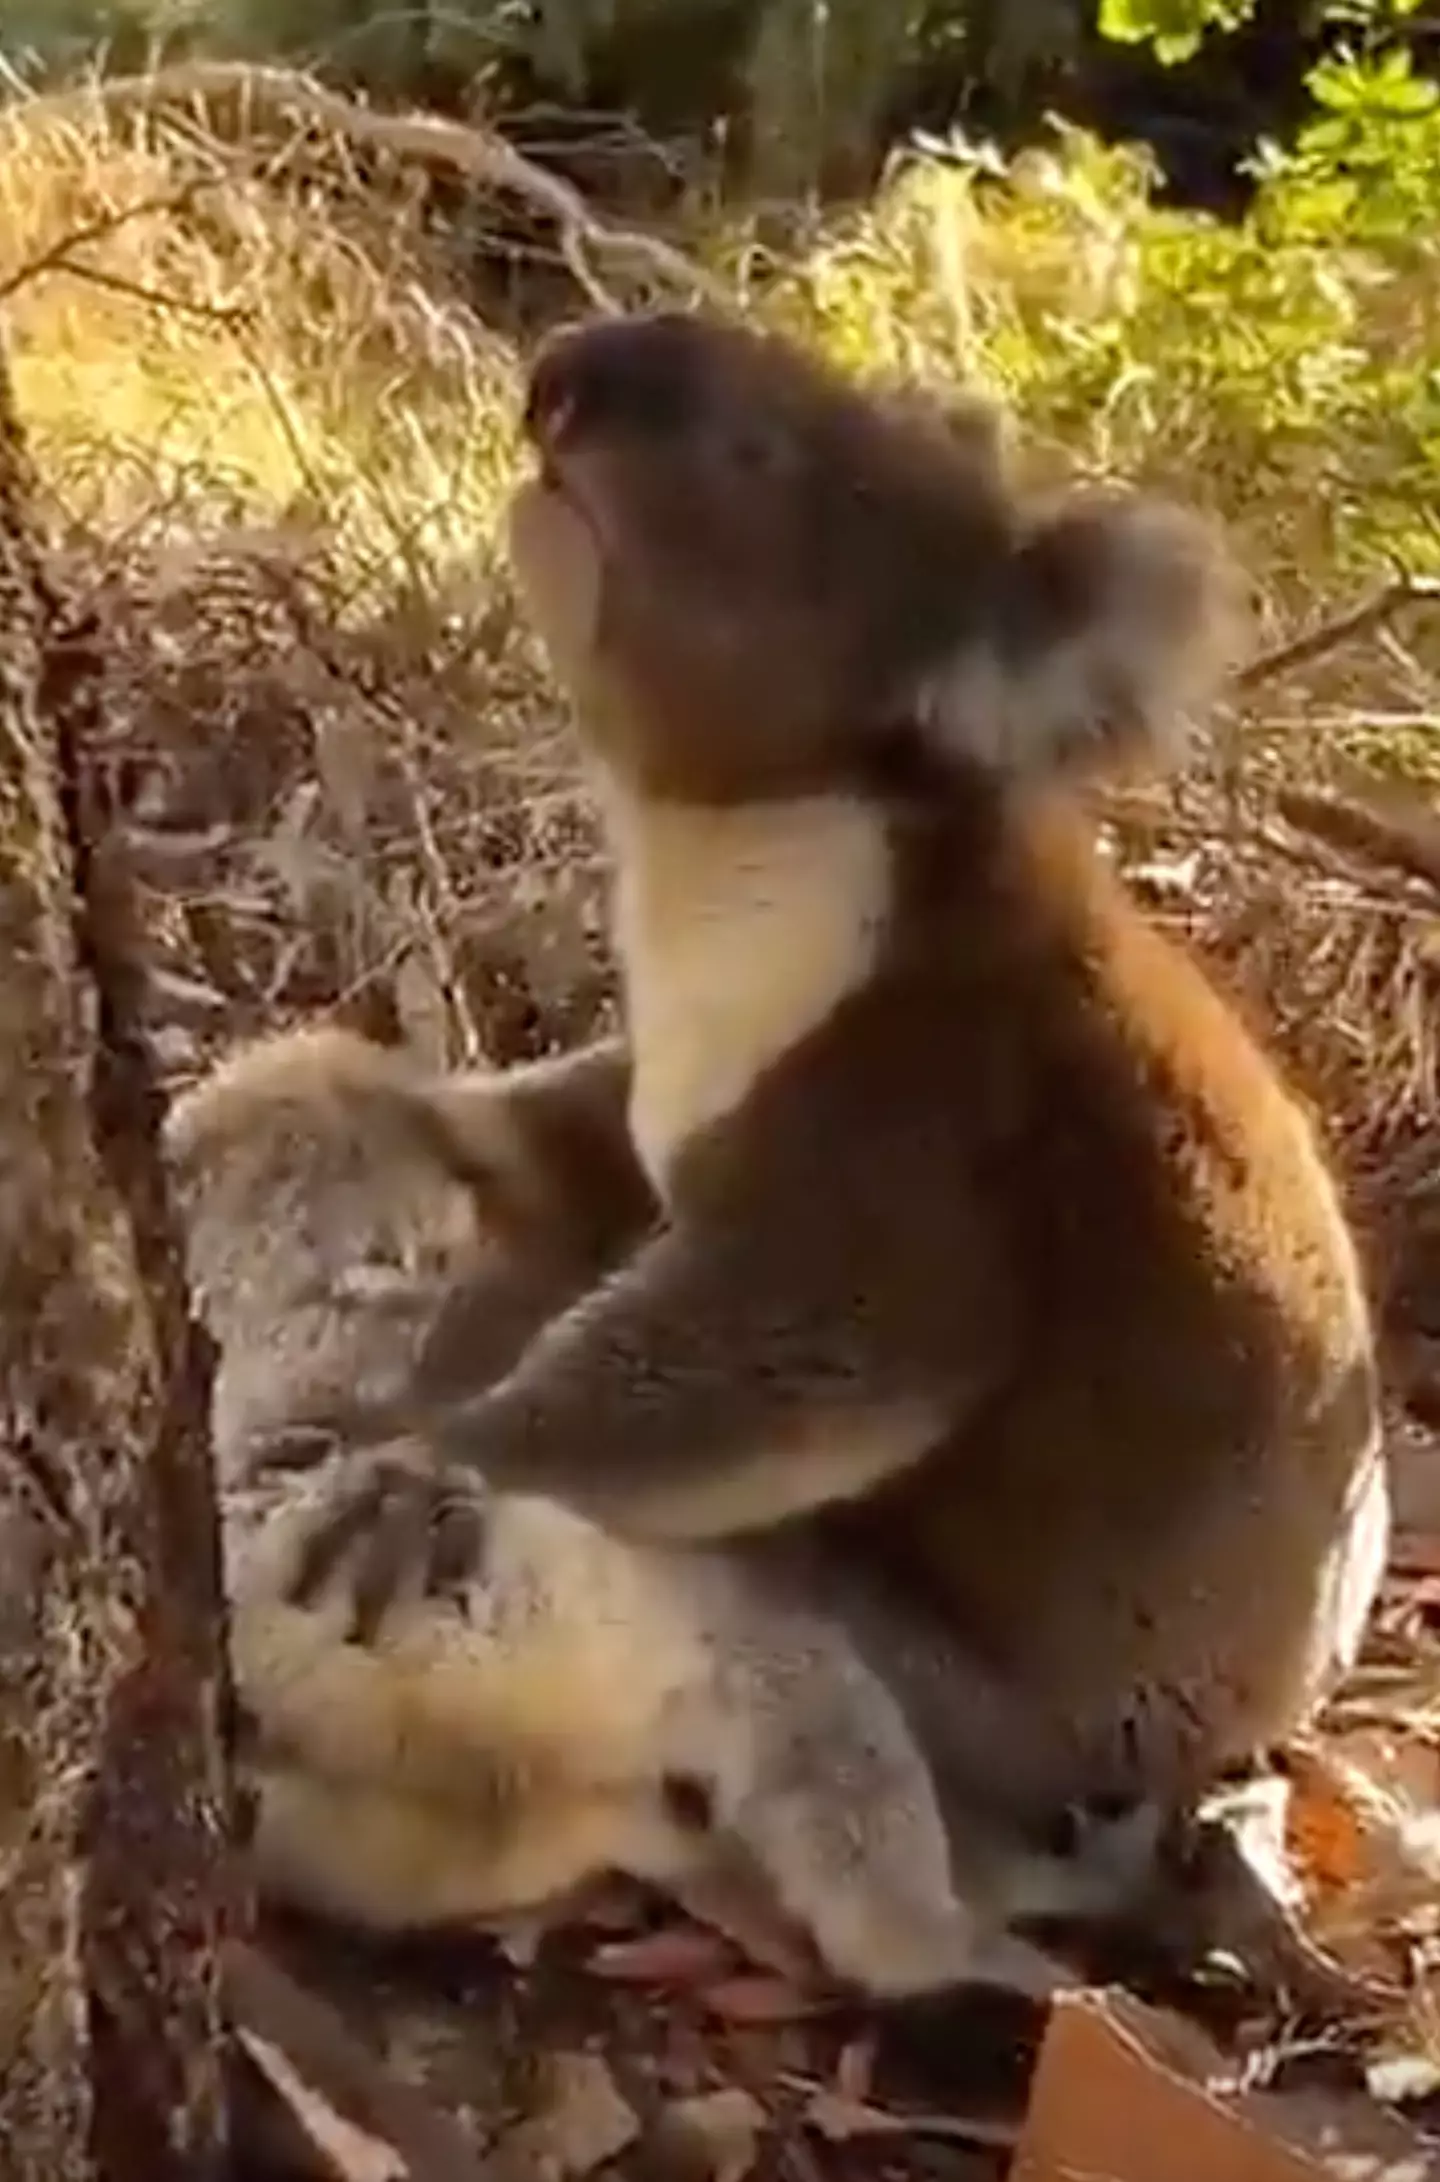 The tear-jerking video shows the male grieving a female koala as he holds her tightly.